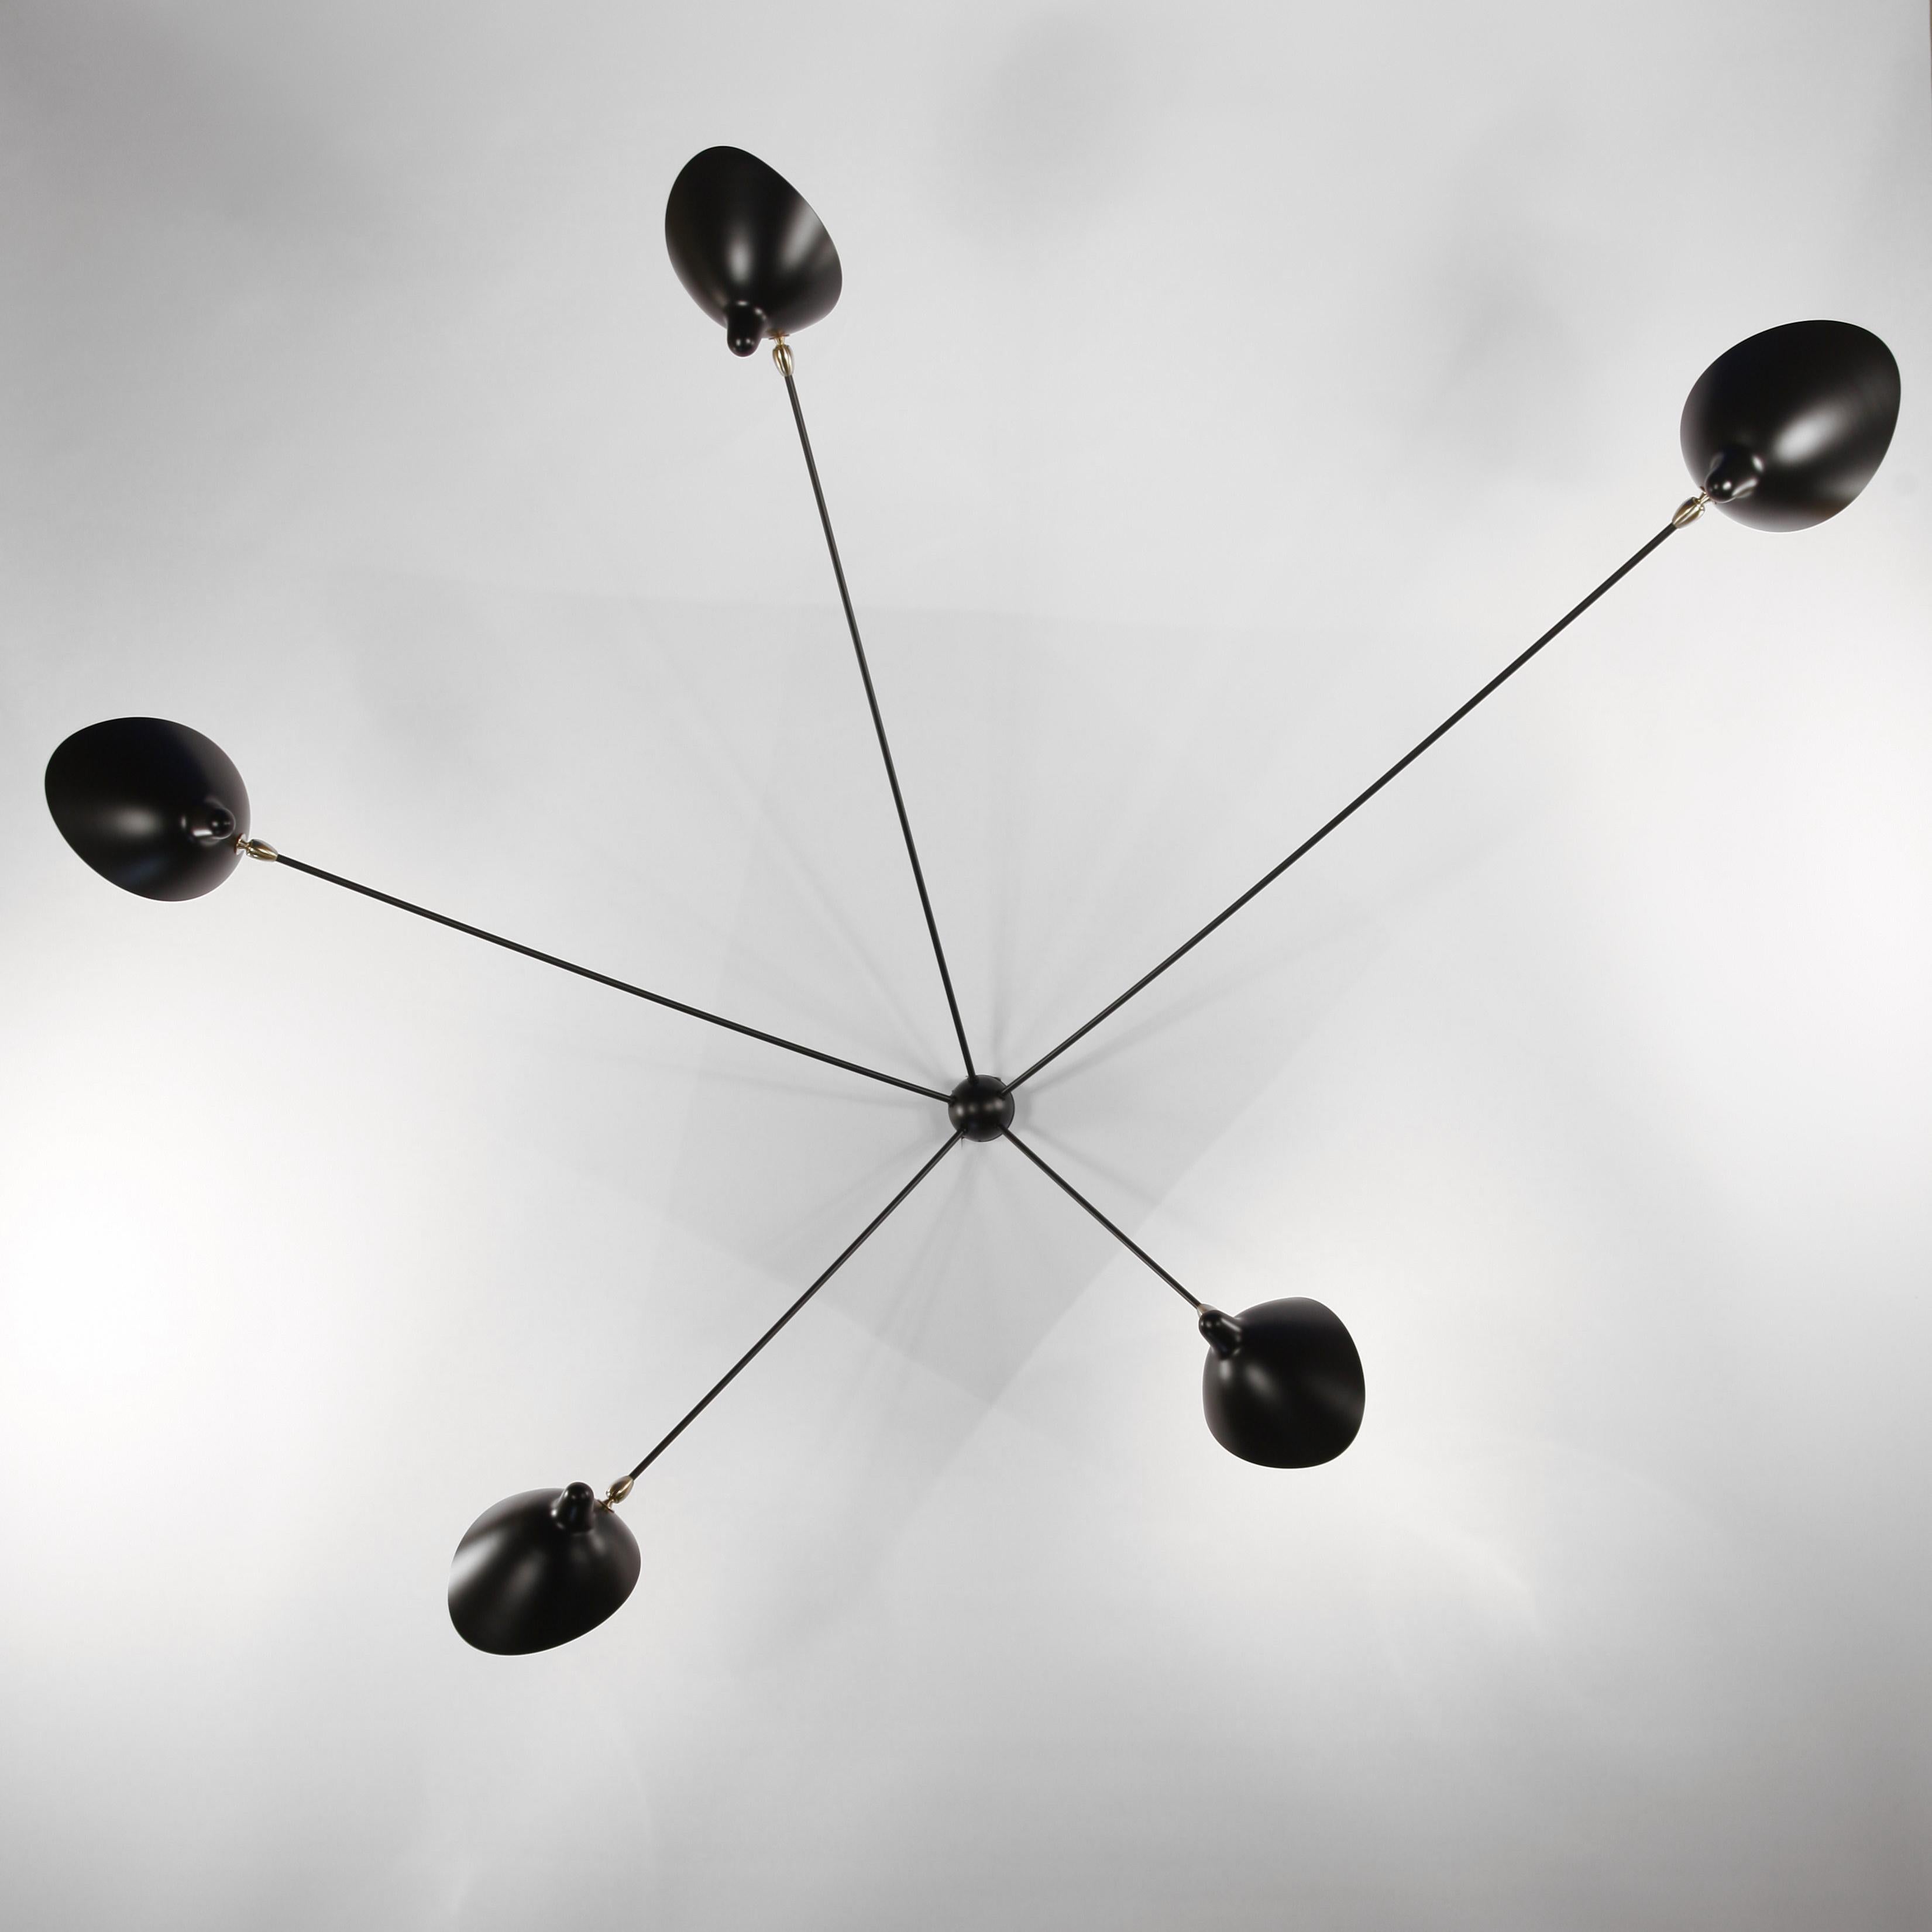 Ceiling wall lamp model 'Five Fixed Arms Spider Wall Lamp' designed by Serge Mouille in 1953.

Manufactured by Editions Serge Mouille in France. The production of lamps, wall lights and floor lamps are manufactured using craftsman’s techniques with